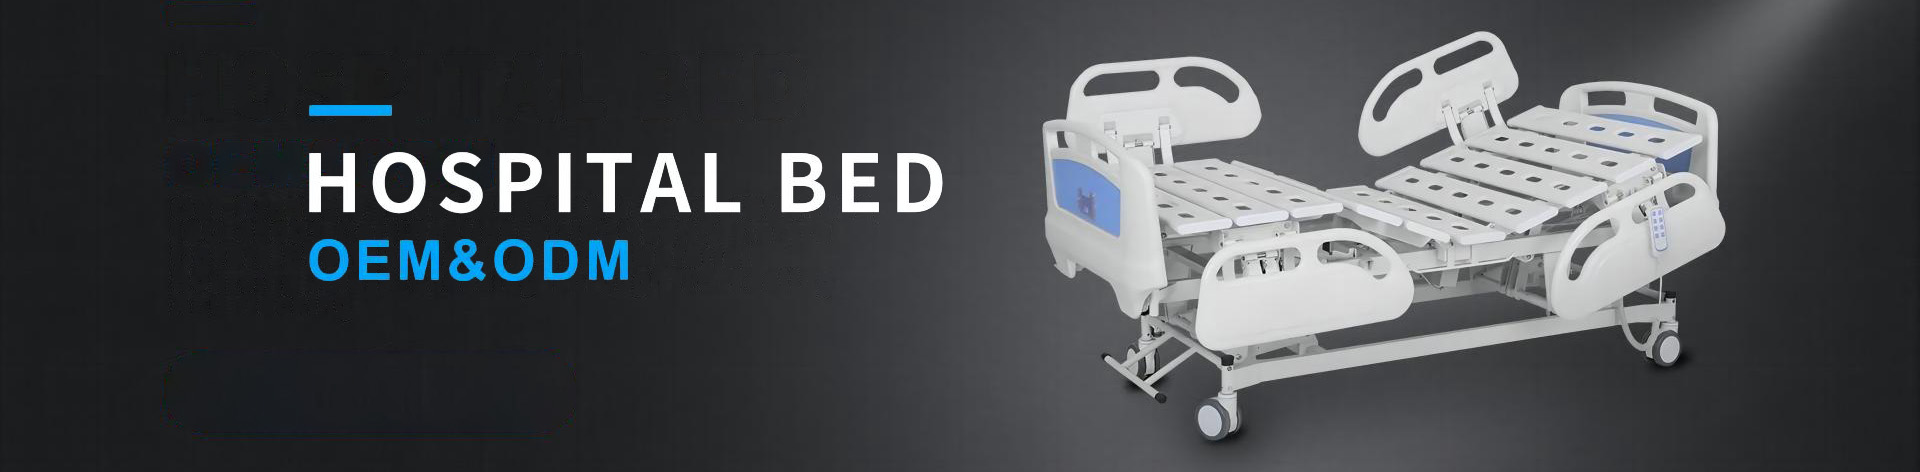 ContactUs-HospitalBeds,Medicalbeds,ElectricBeds,FlatBeds,IcuBeds